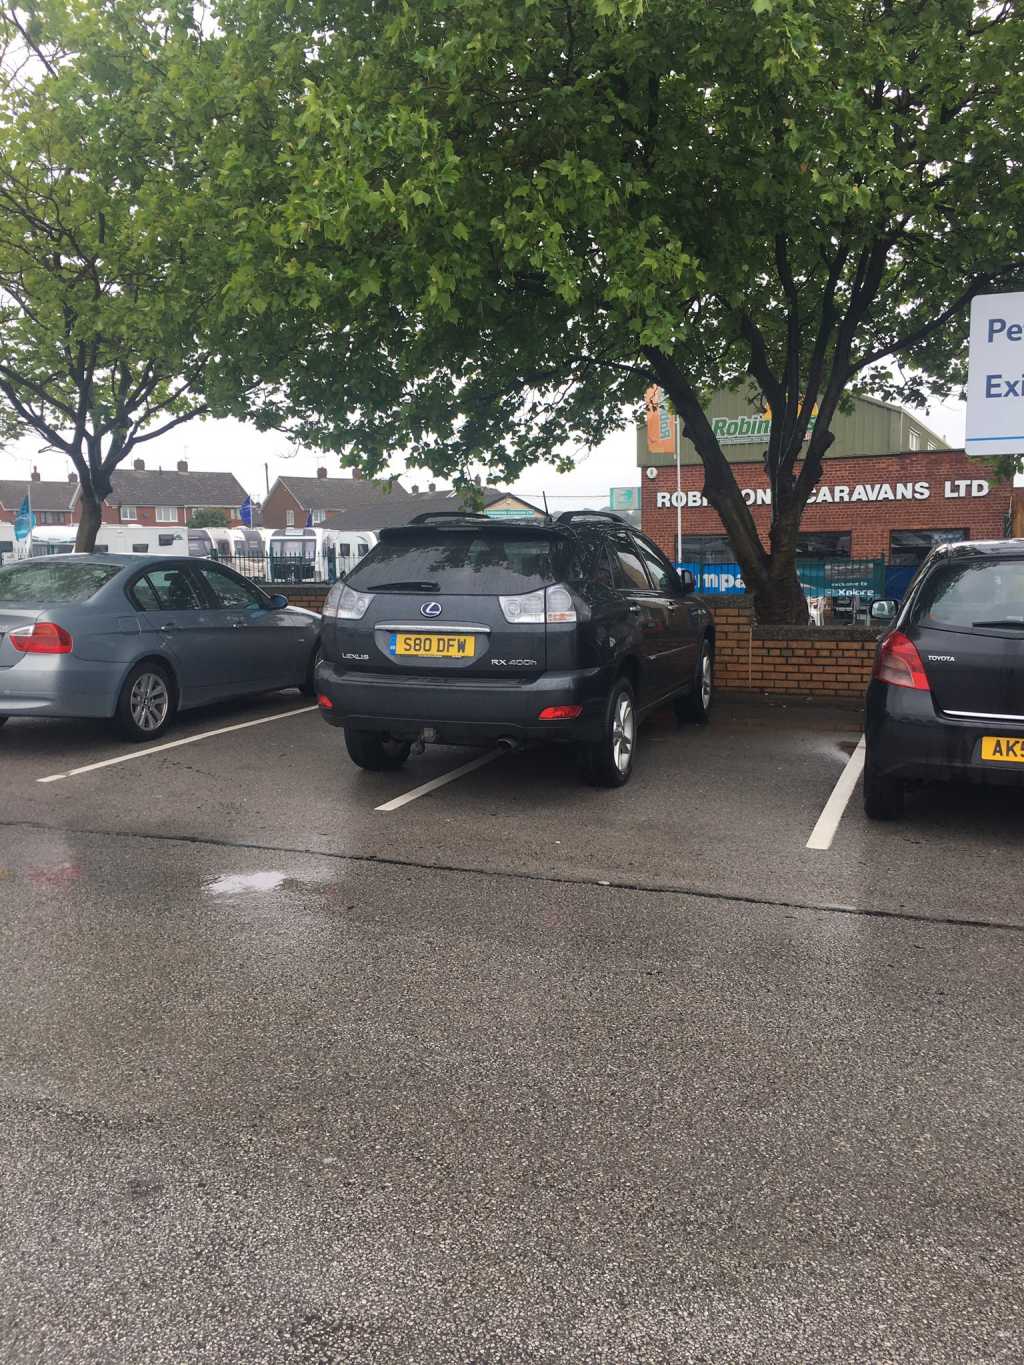 S80 DFW is an Inconsiderate Parker